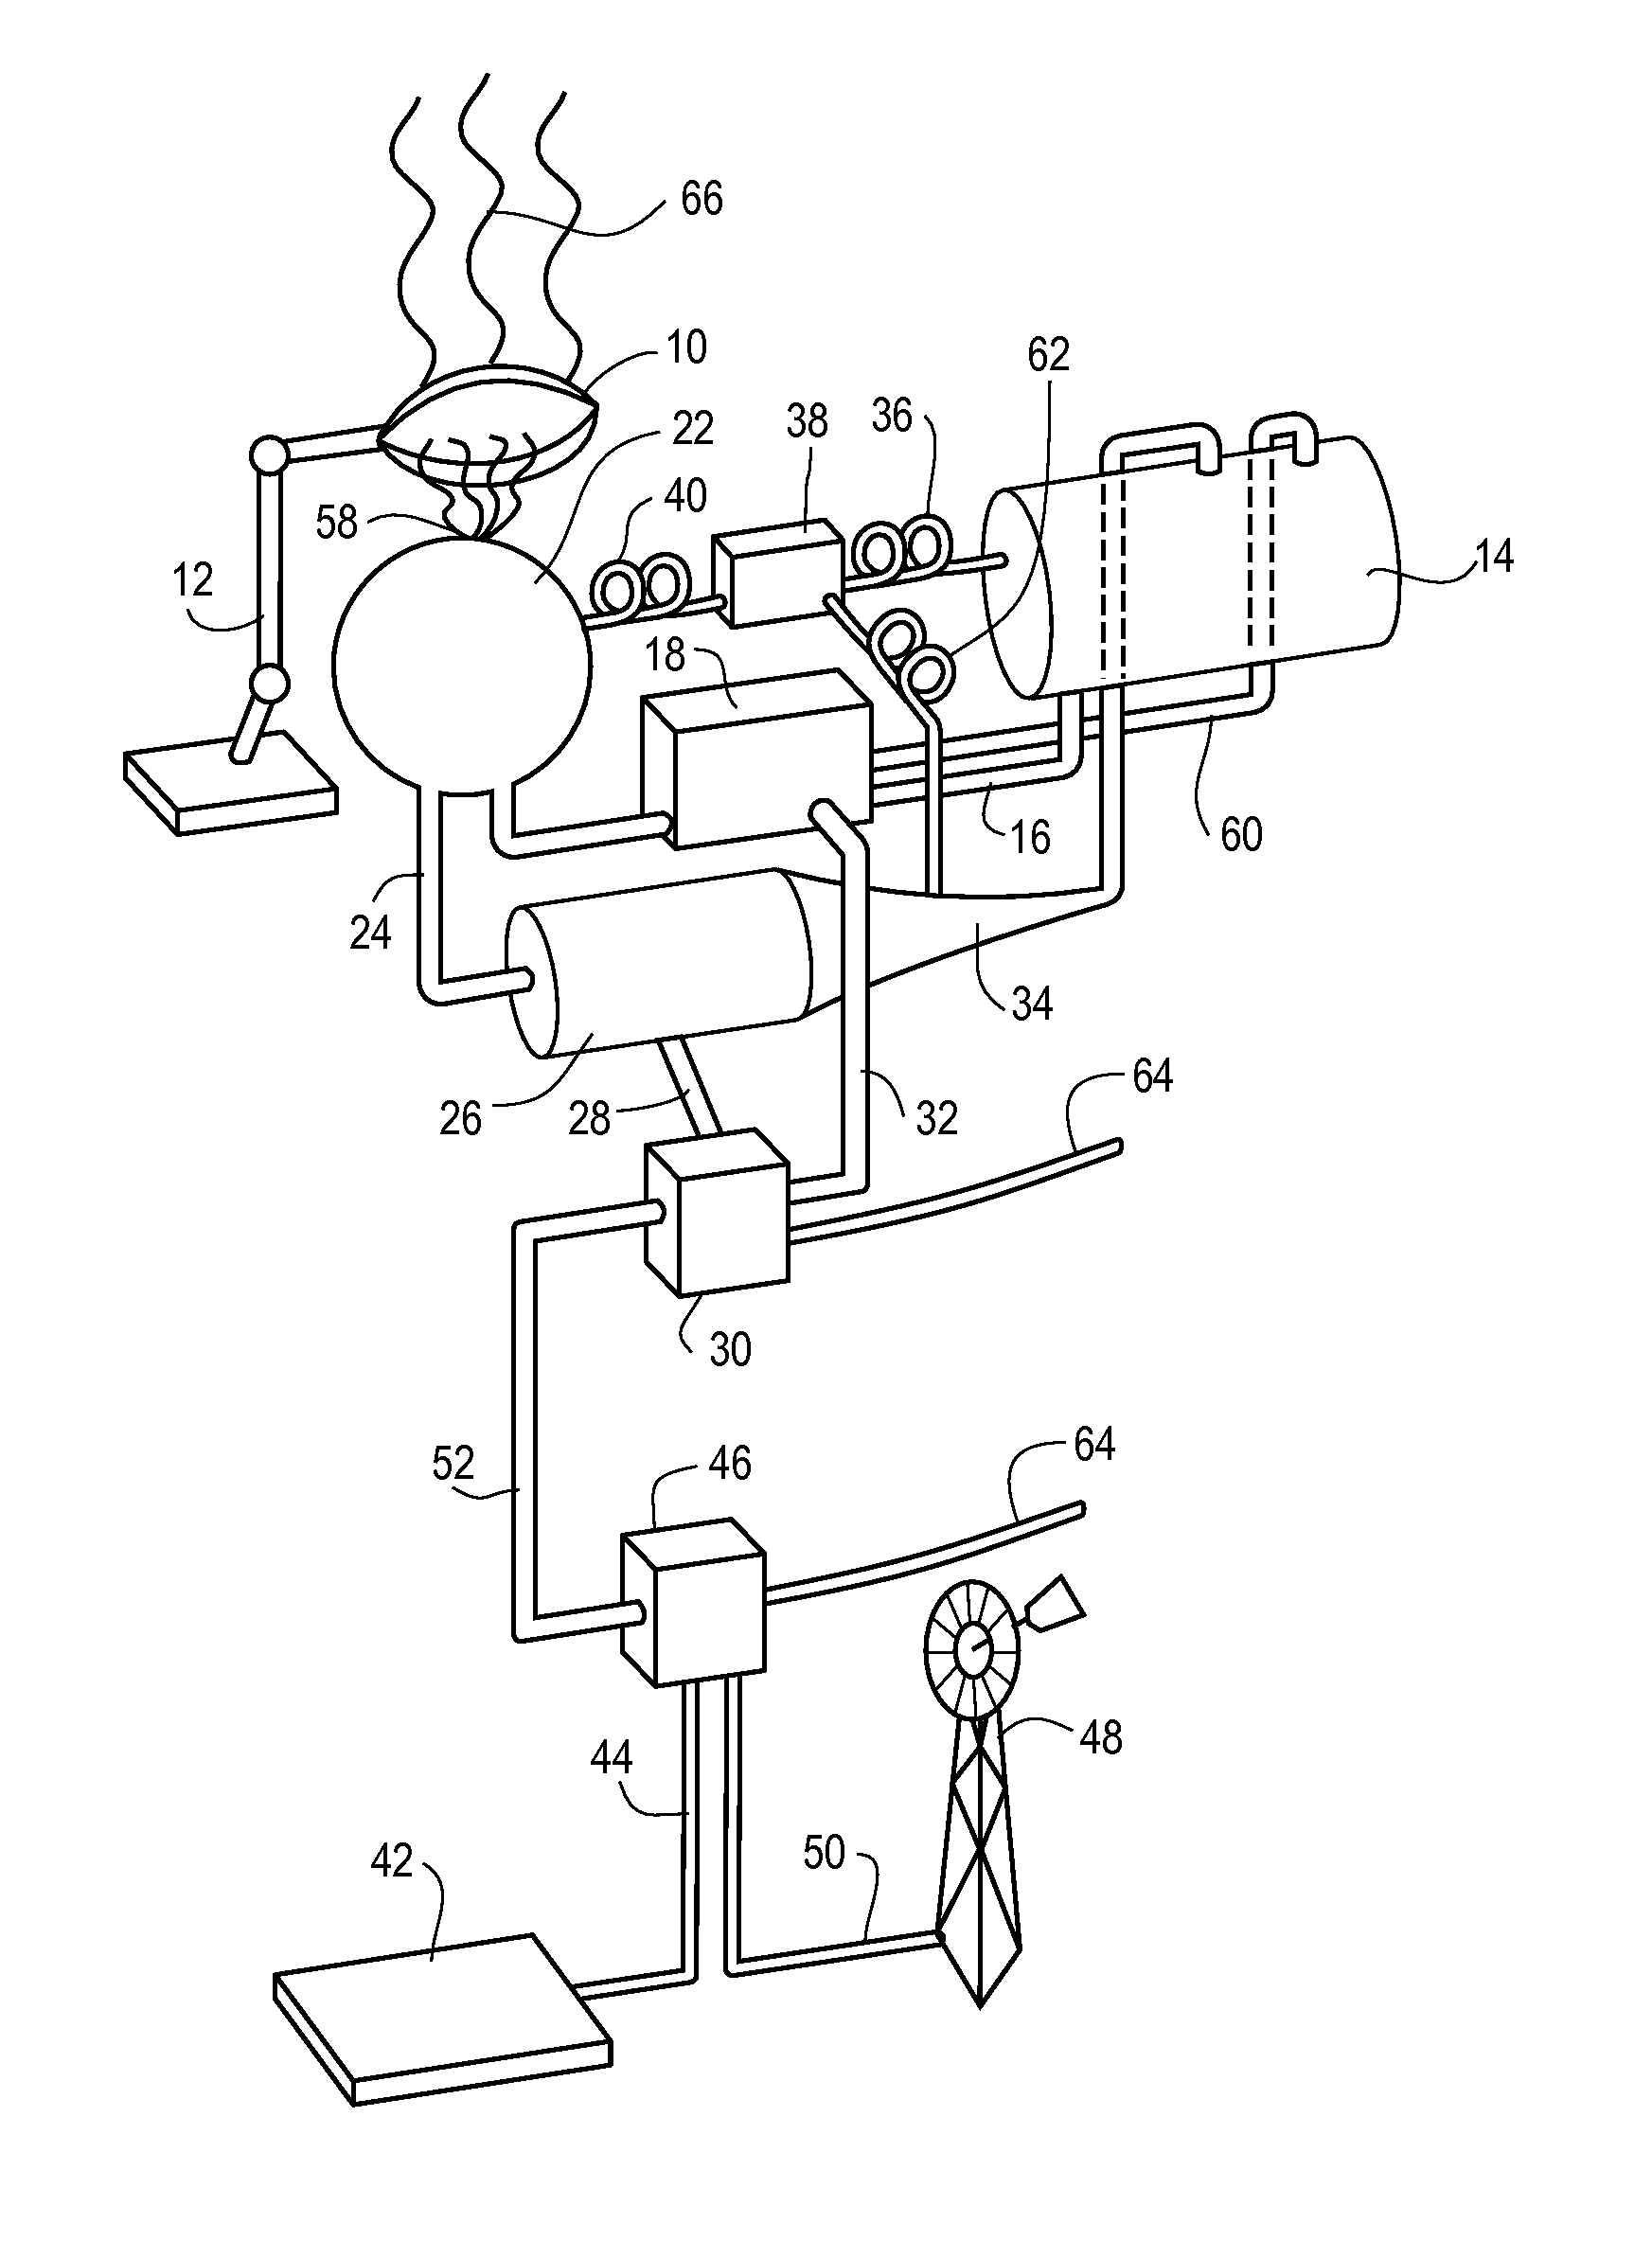 Solar energy power plant and method of producing electricity